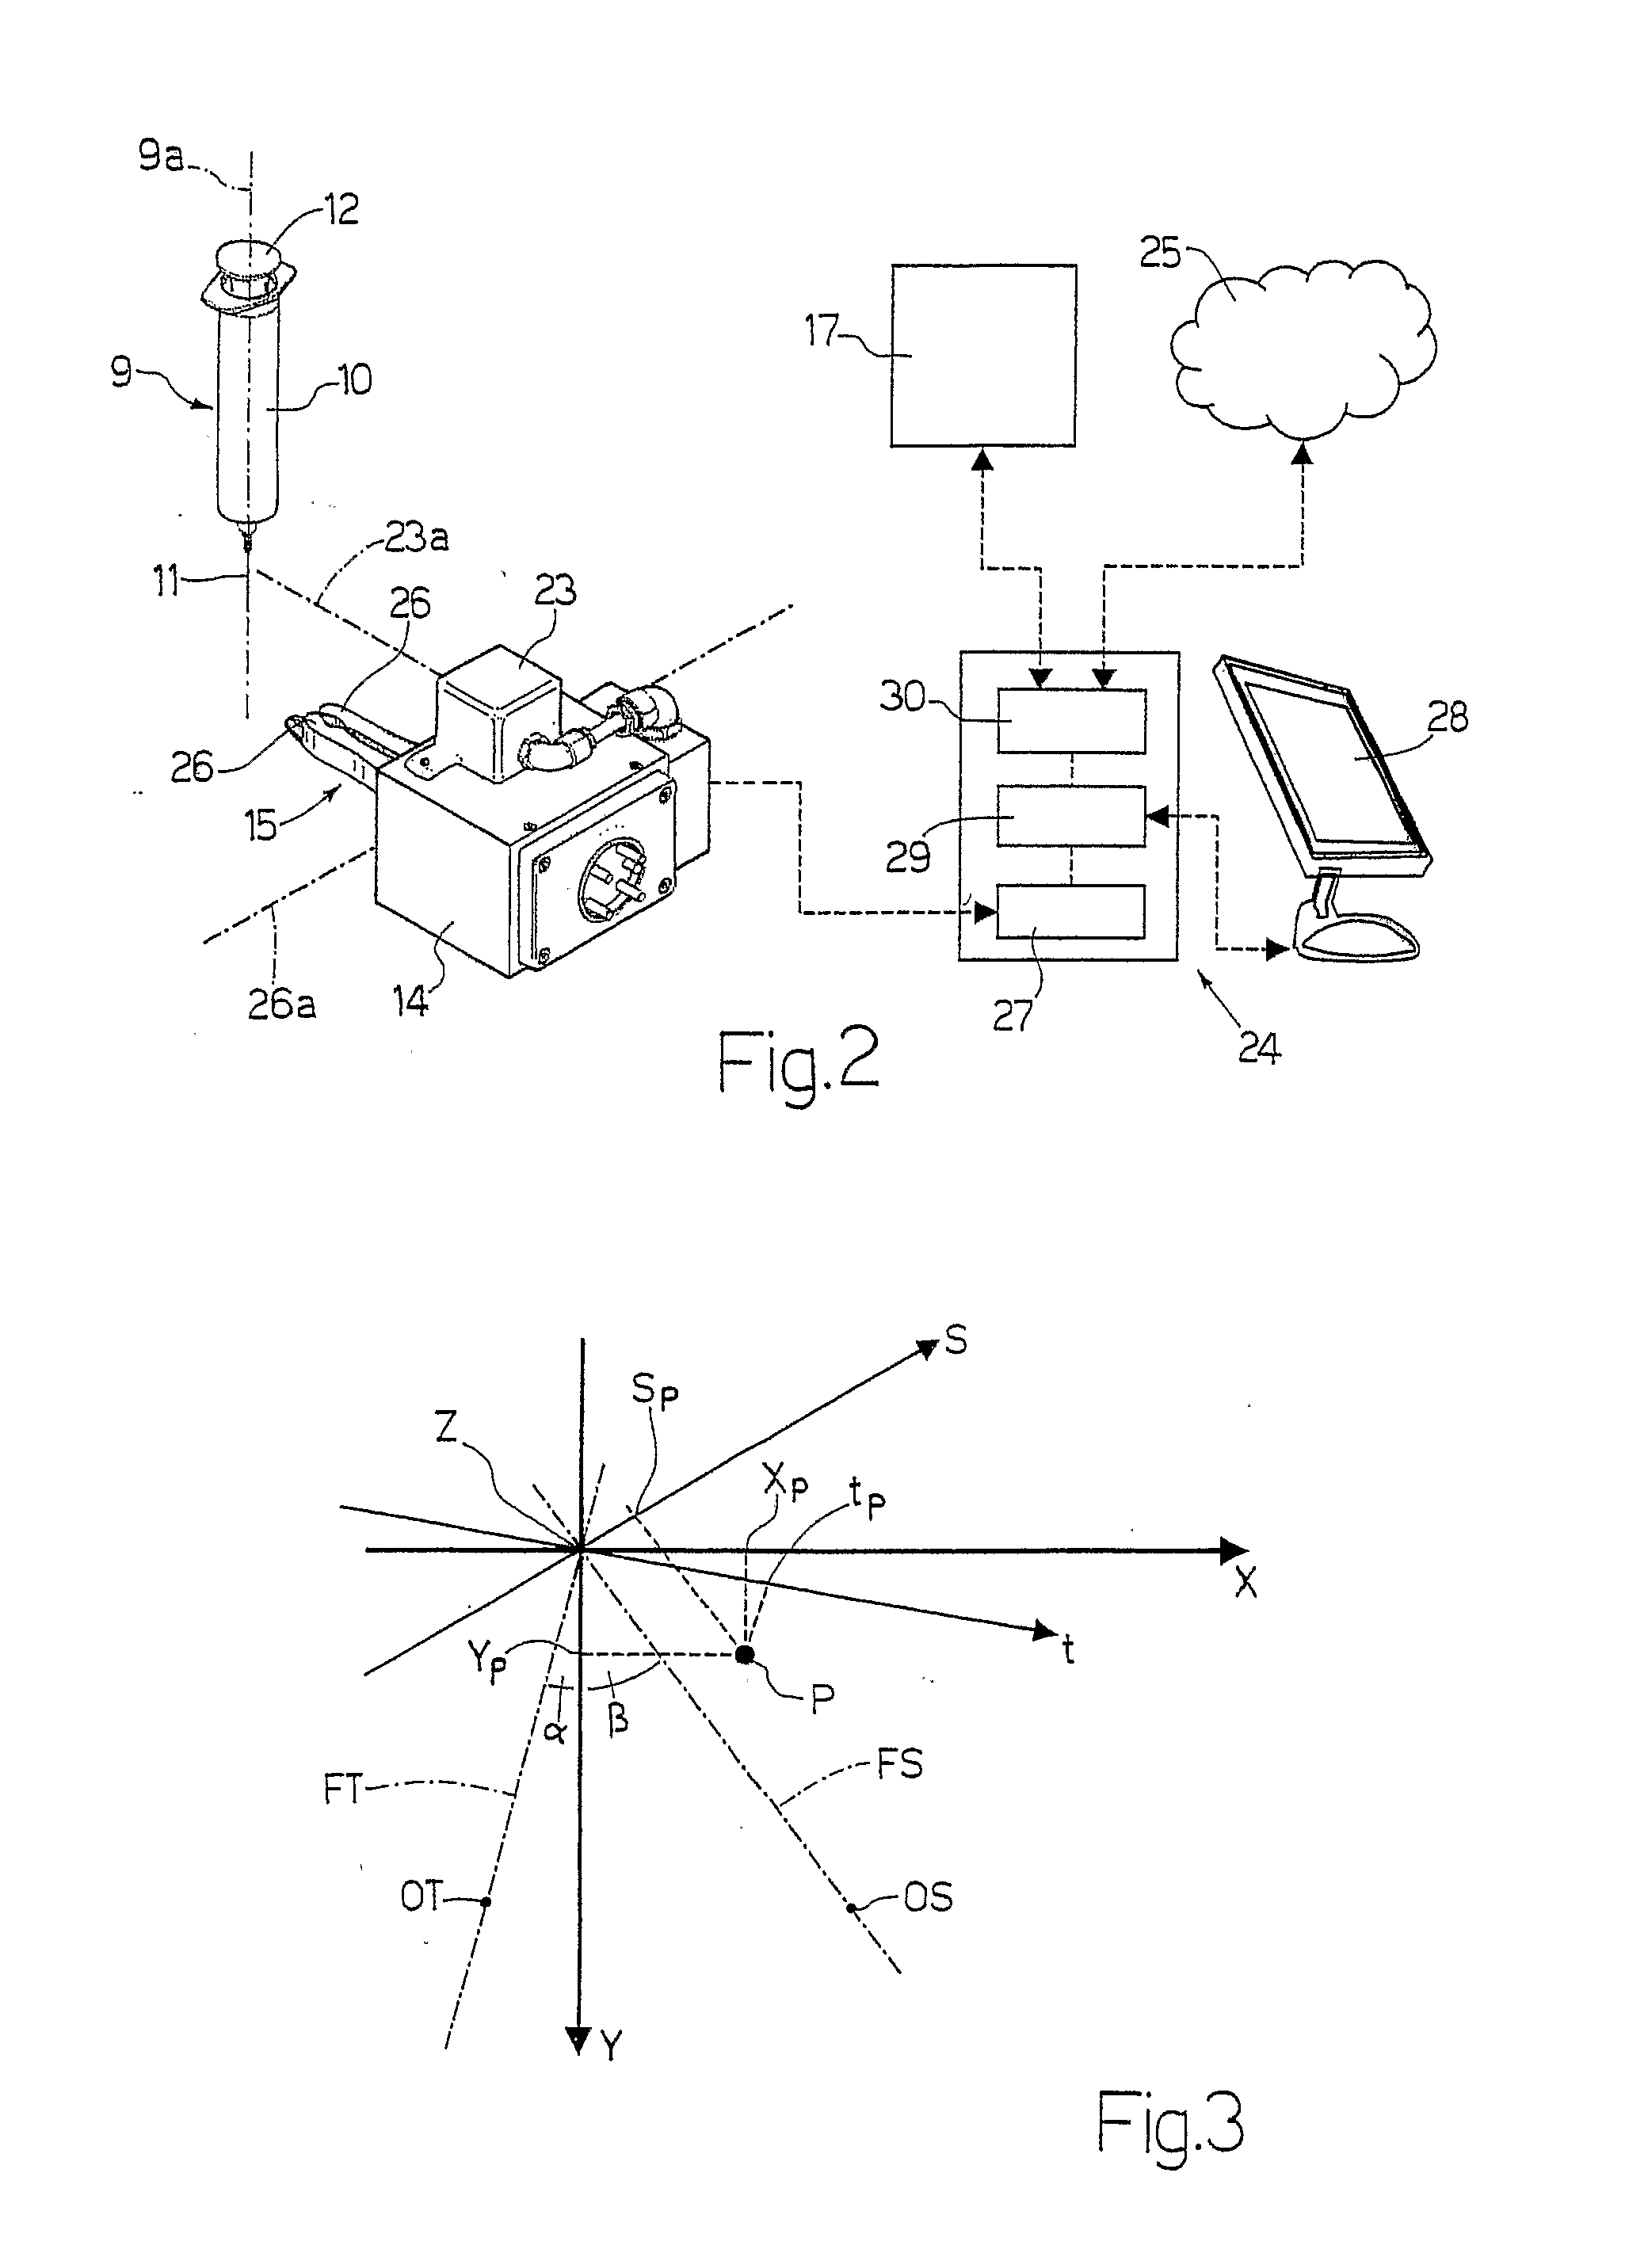 Method and machine for manipulating toxic substances